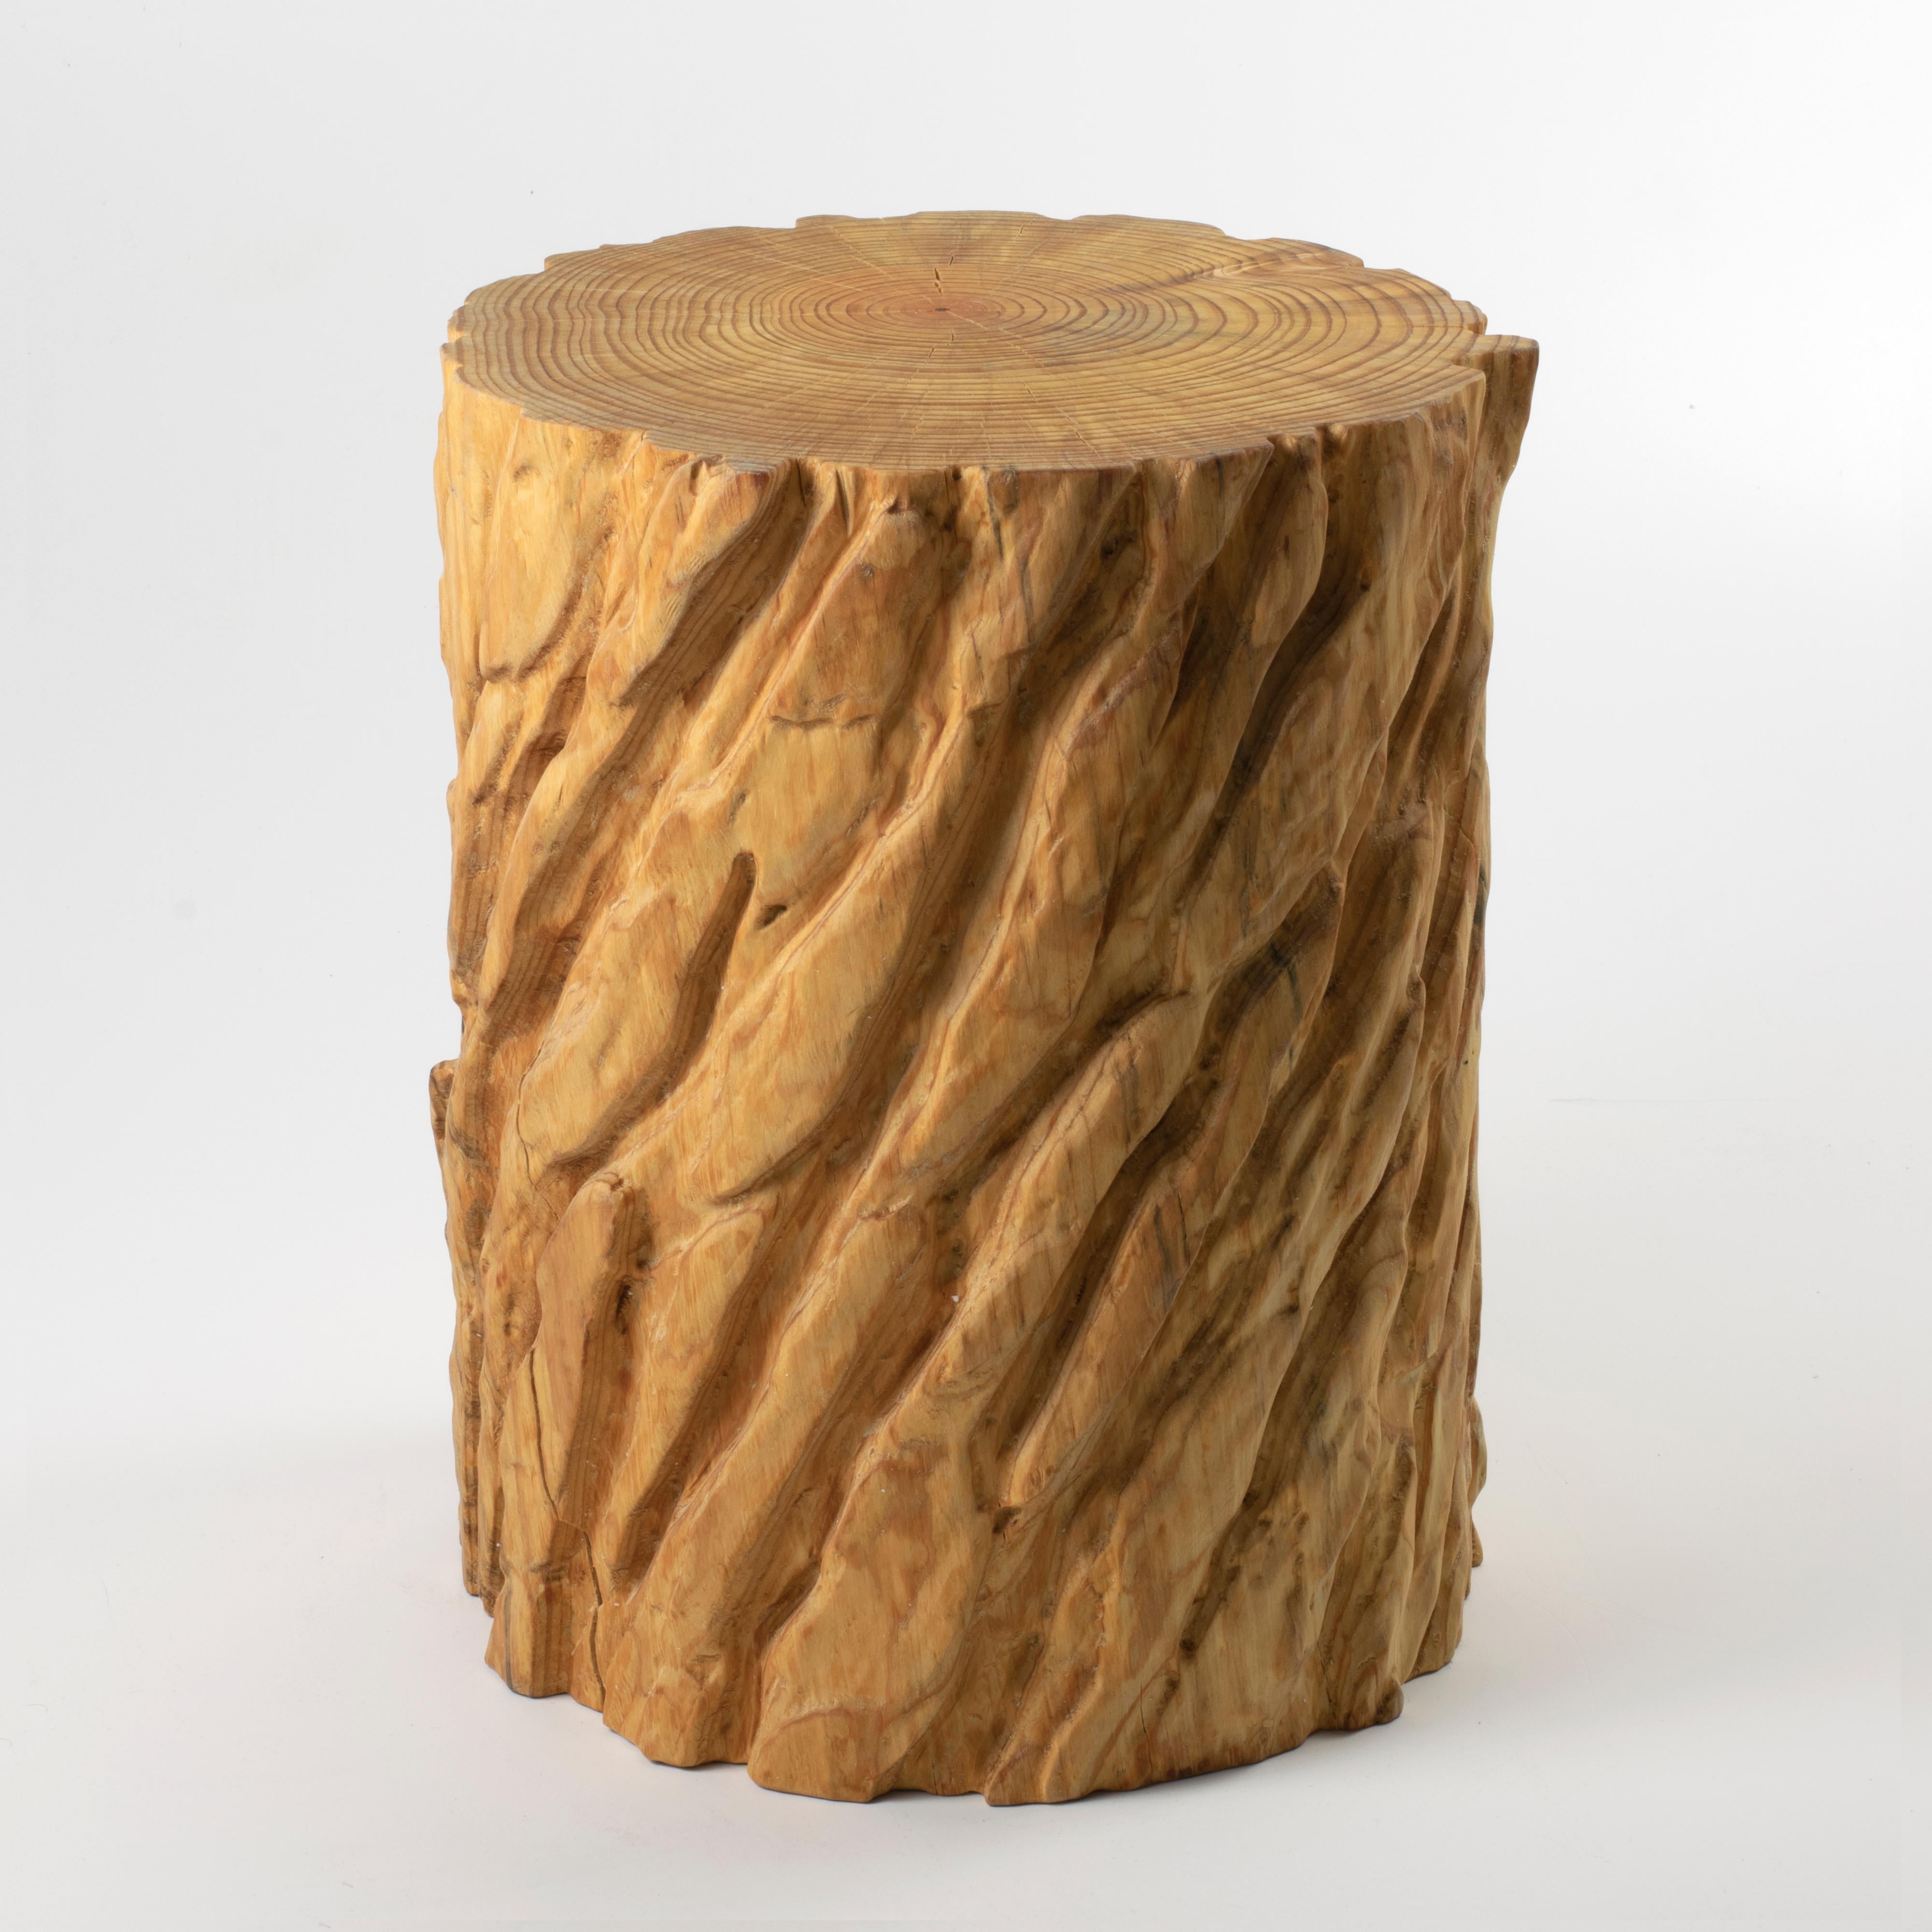 American Bark Map Stool, Set of 3 by Timbur, Represented by Tuleste Factory